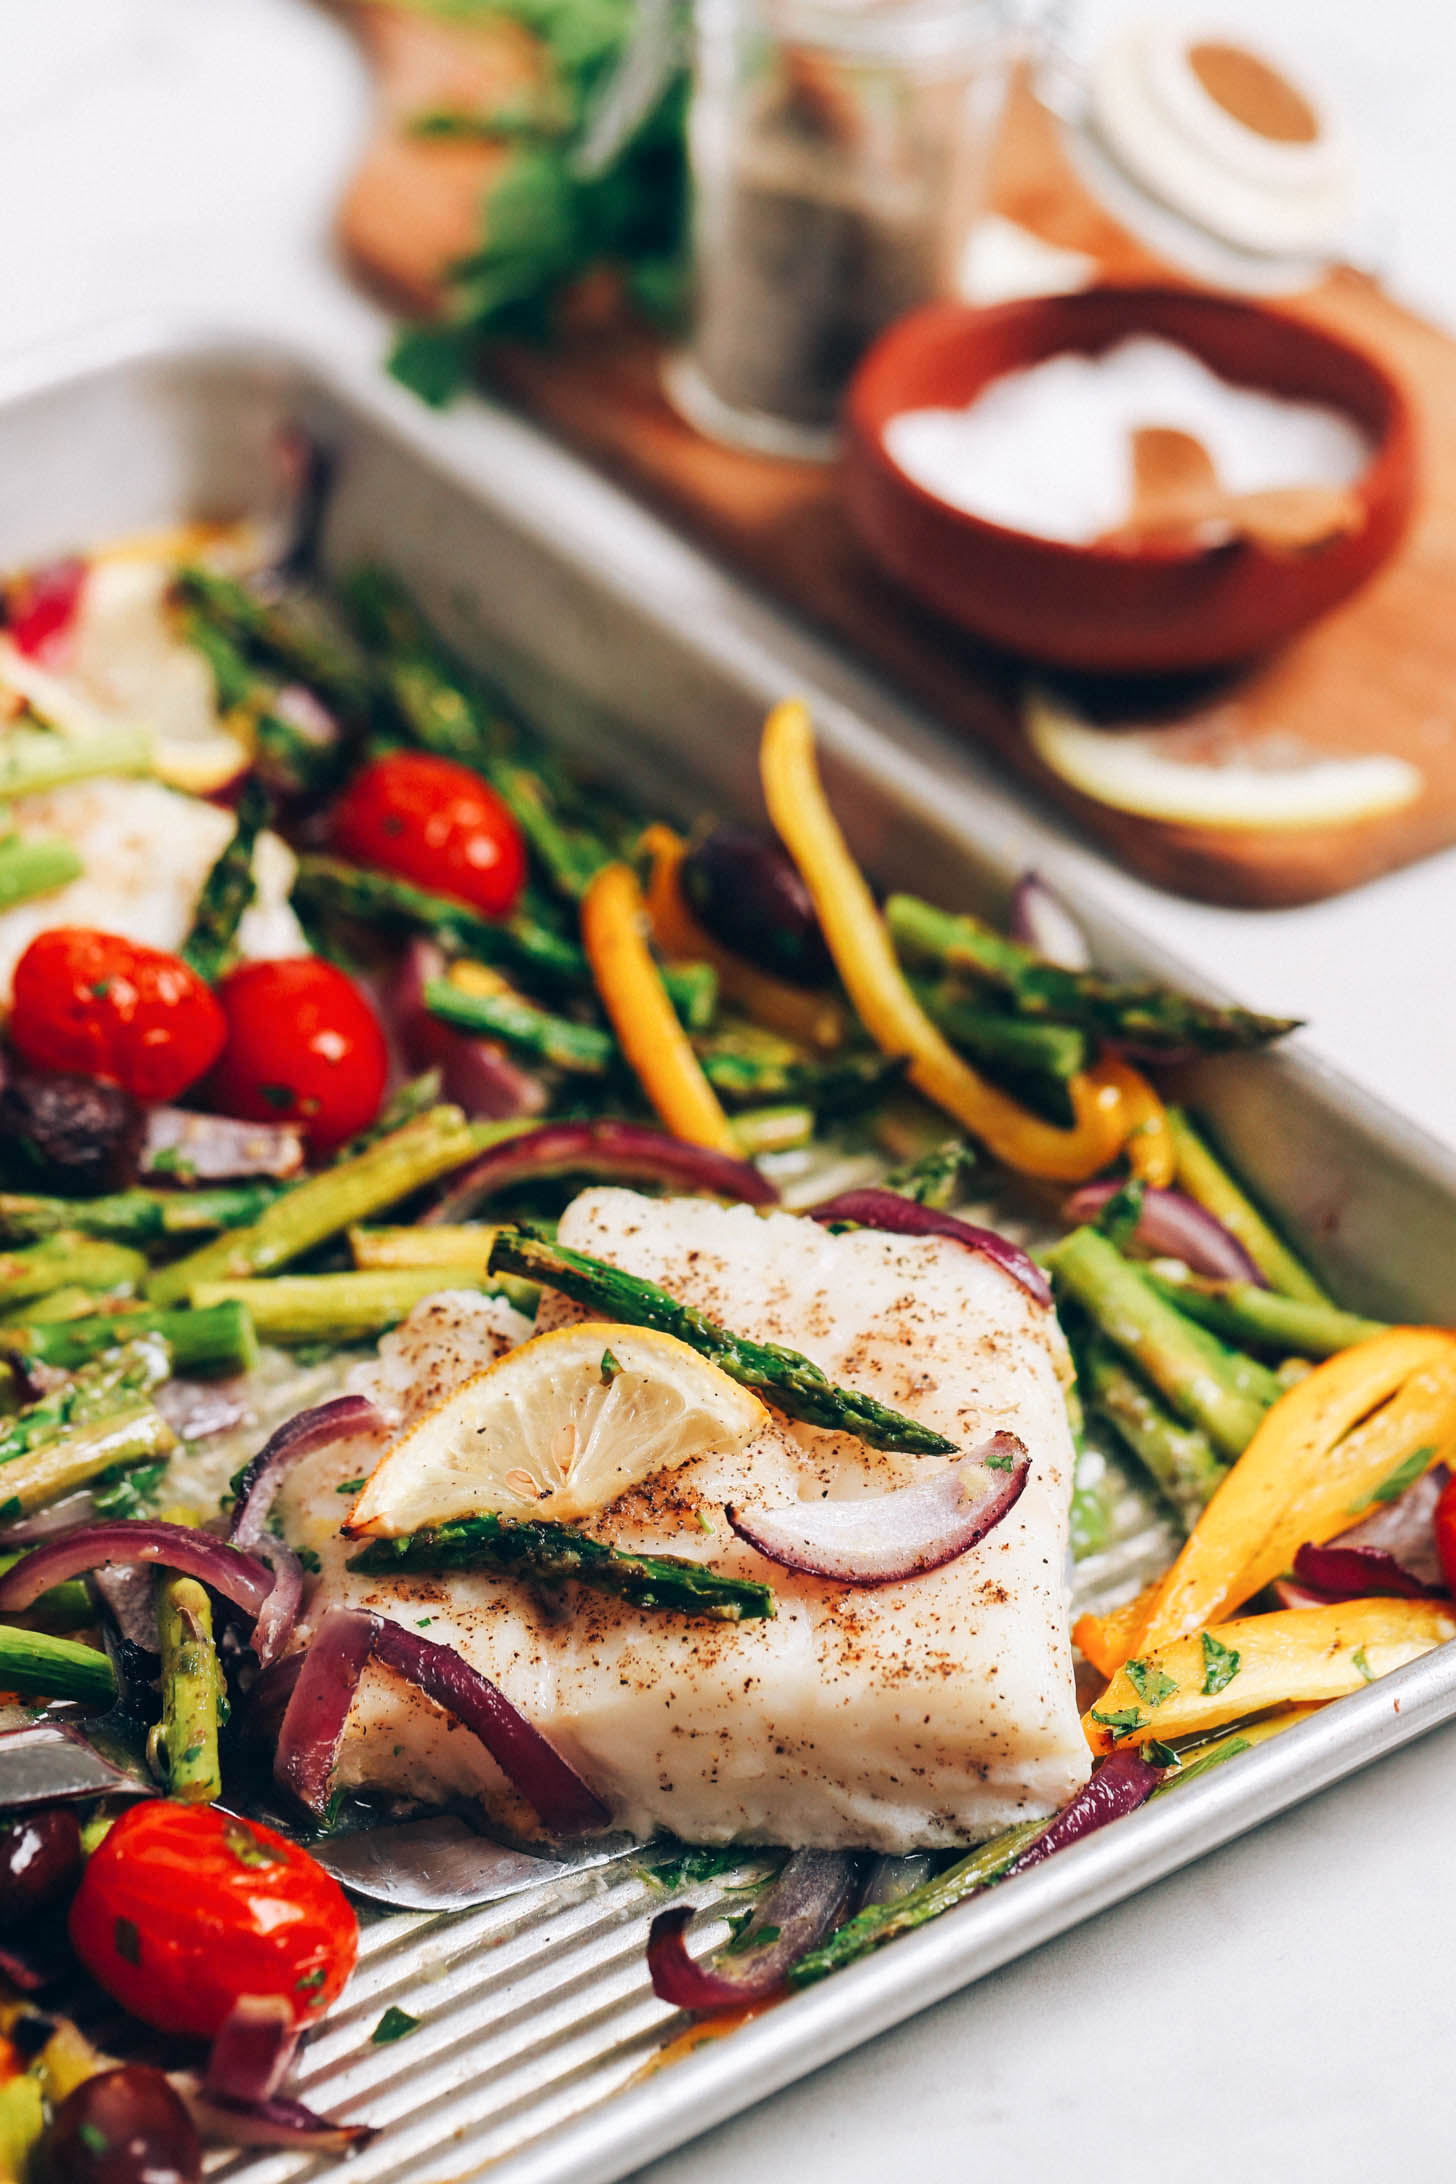 Baked cod fillet on a sheet pan with lemon slices and vegetables